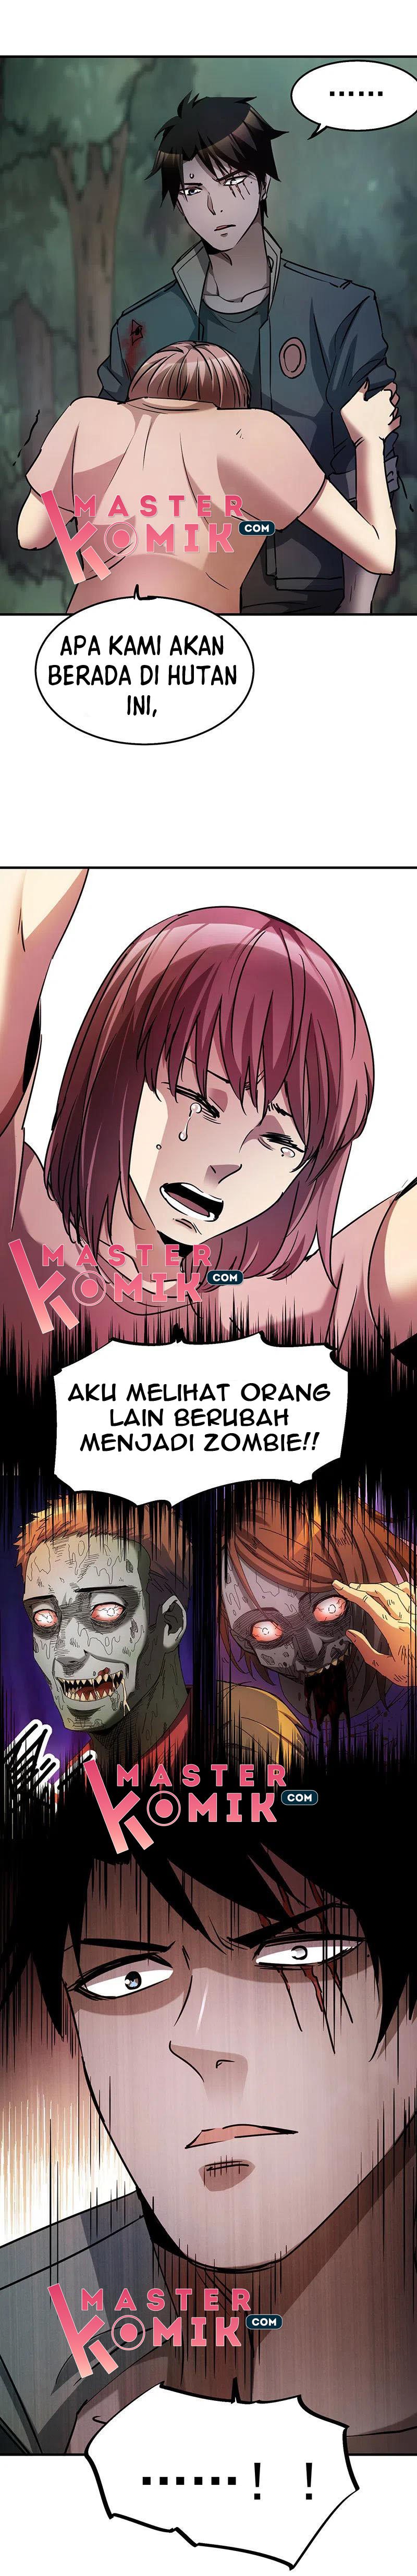 Strongest Evolution Of Zombie Chapter 42